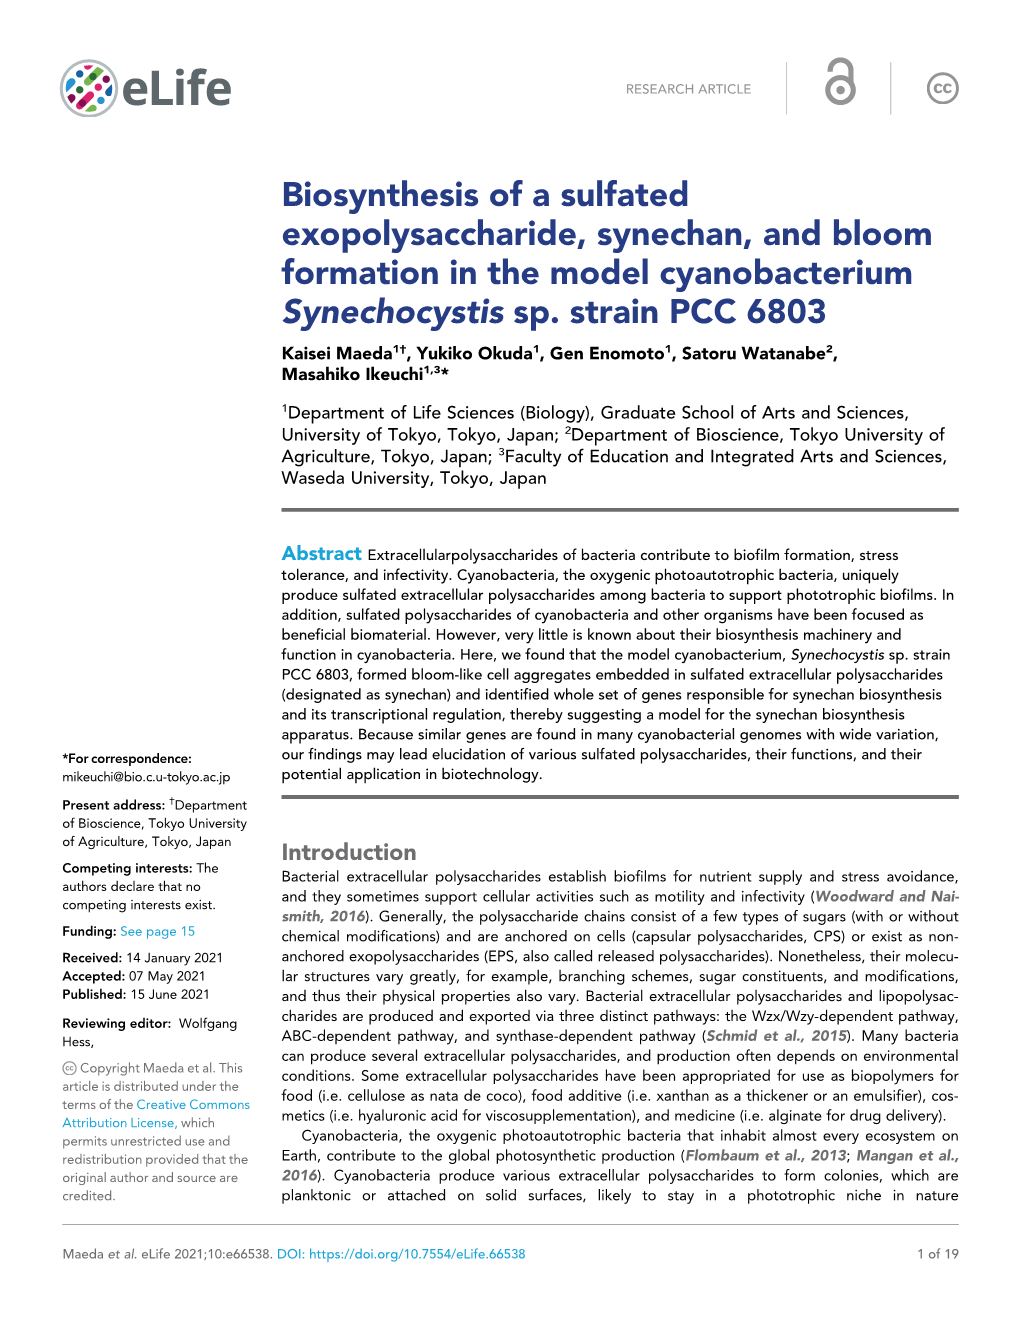 Biosynthesis of a Sulfated Exopolysaccharide, Synechan, and Bloom Formation in the Model Cyanobacterium Synechocystis Sp. Strain